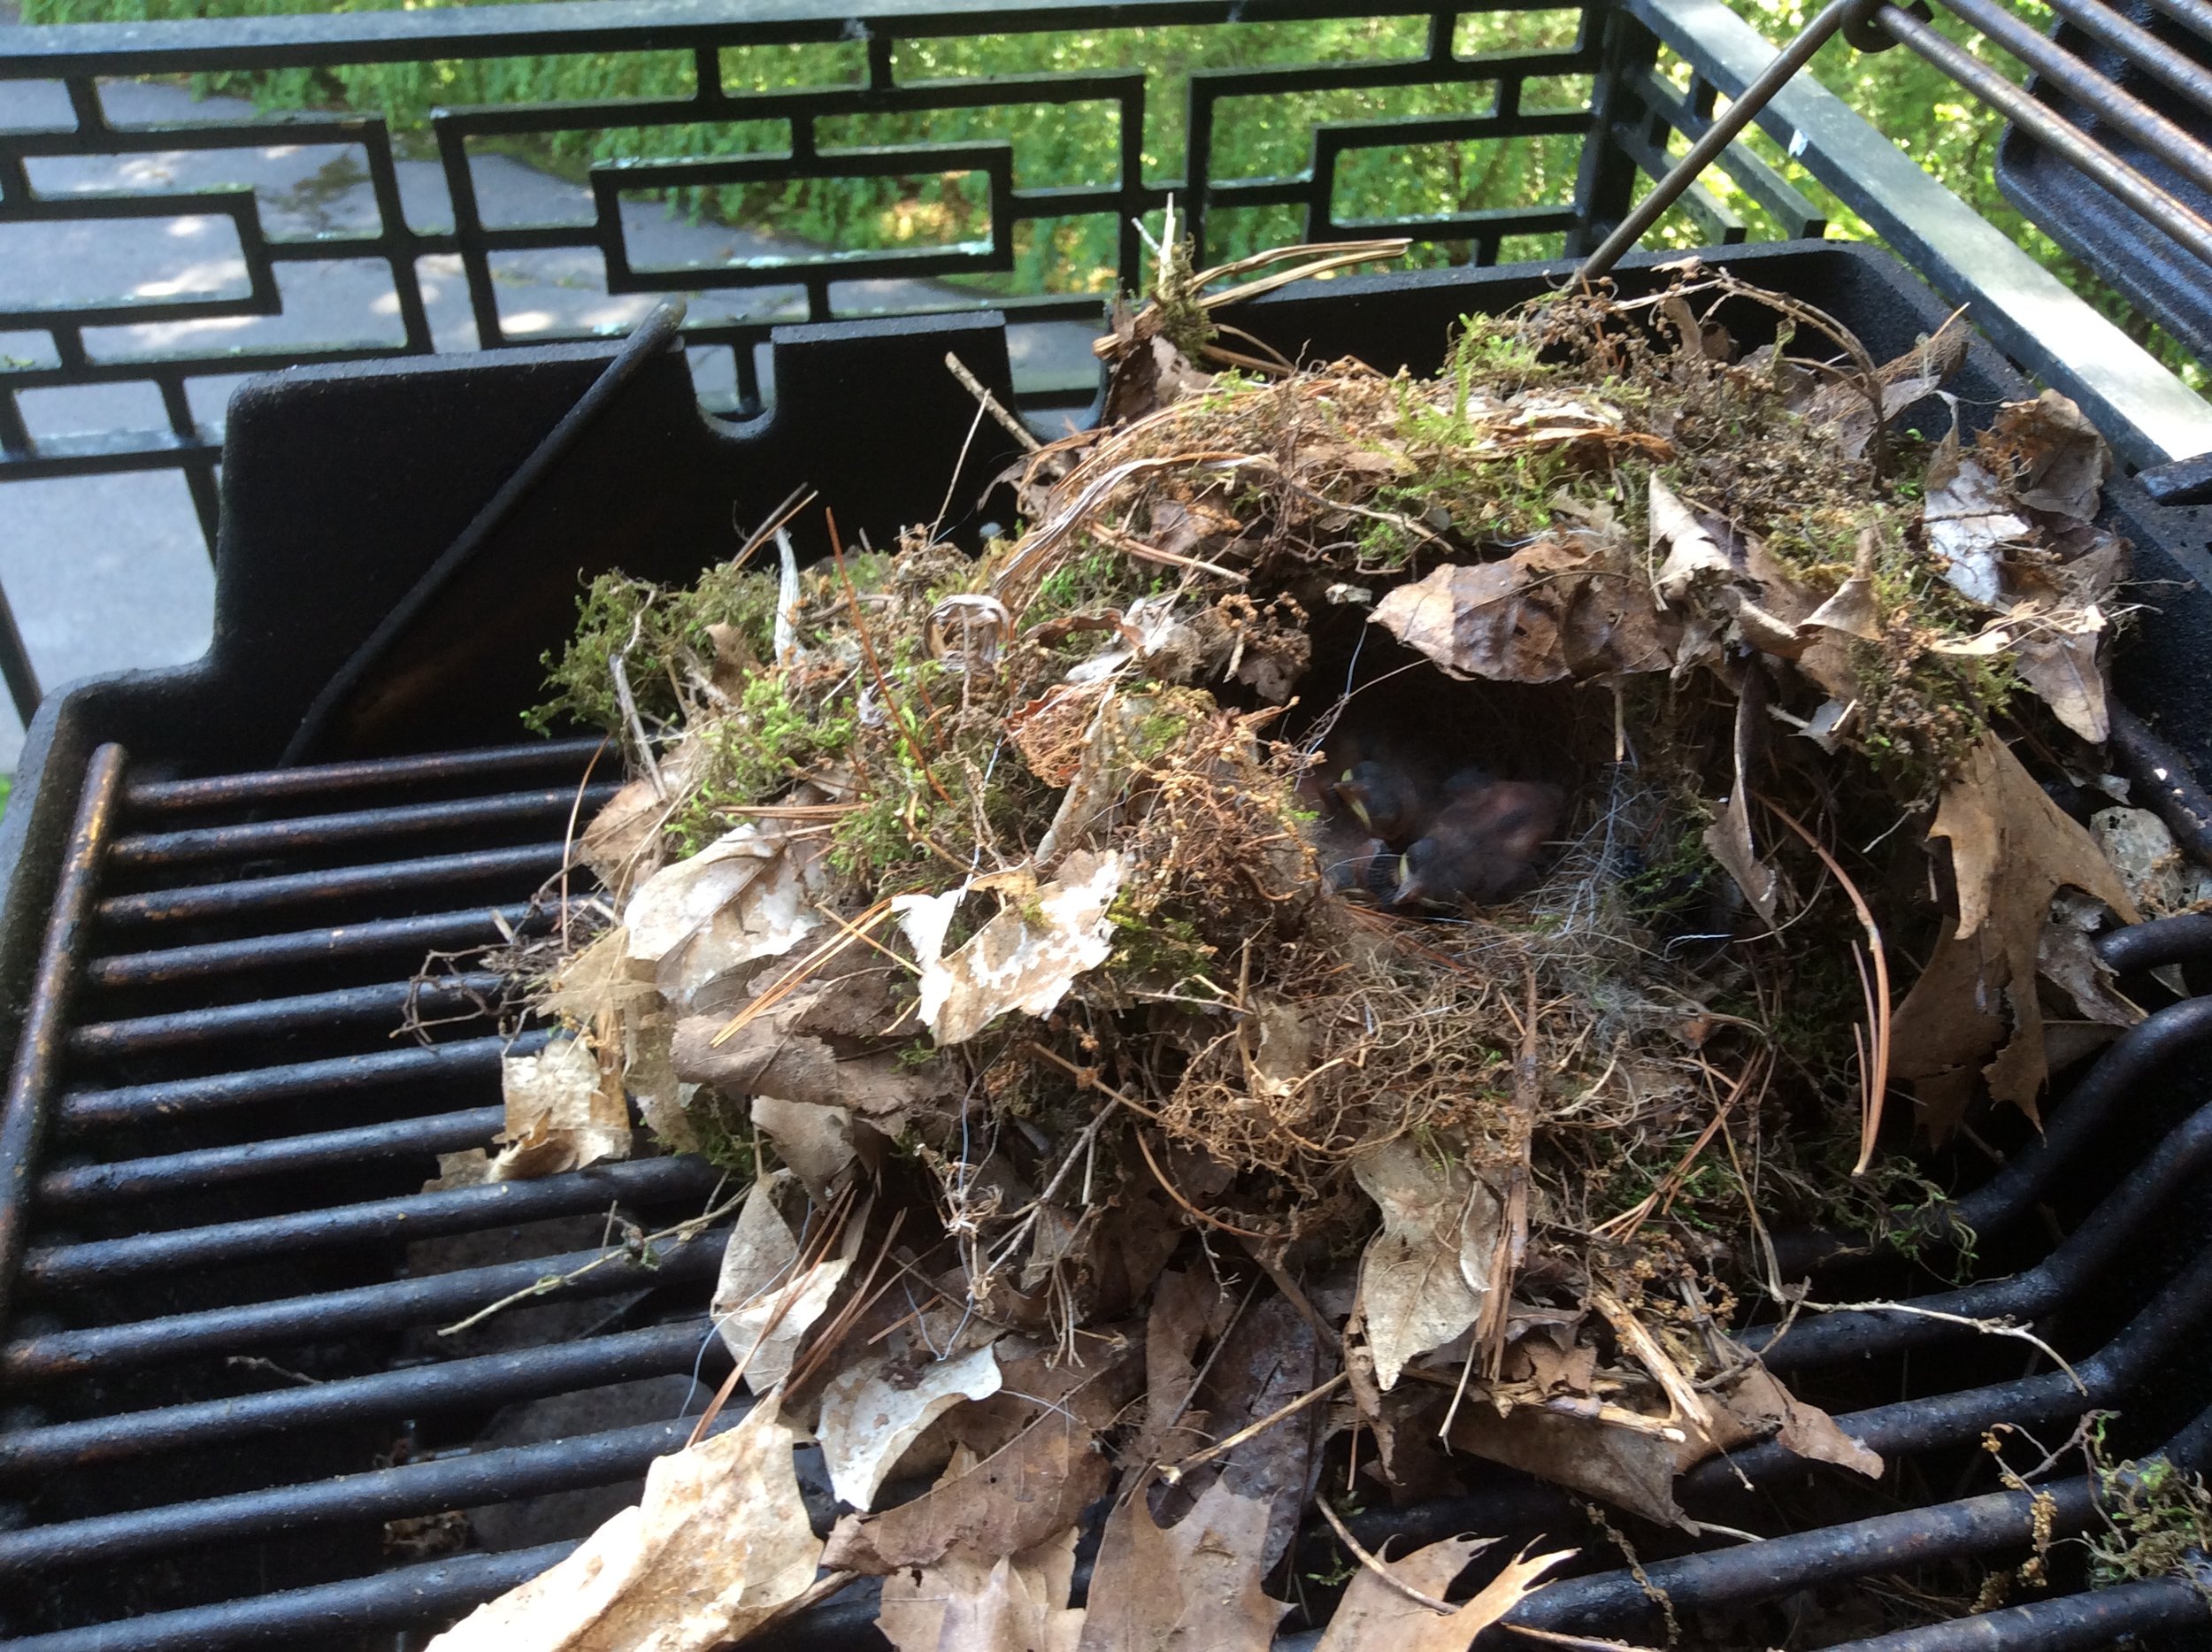 Carolina Wren nest in BBQ grill by Shelley Page